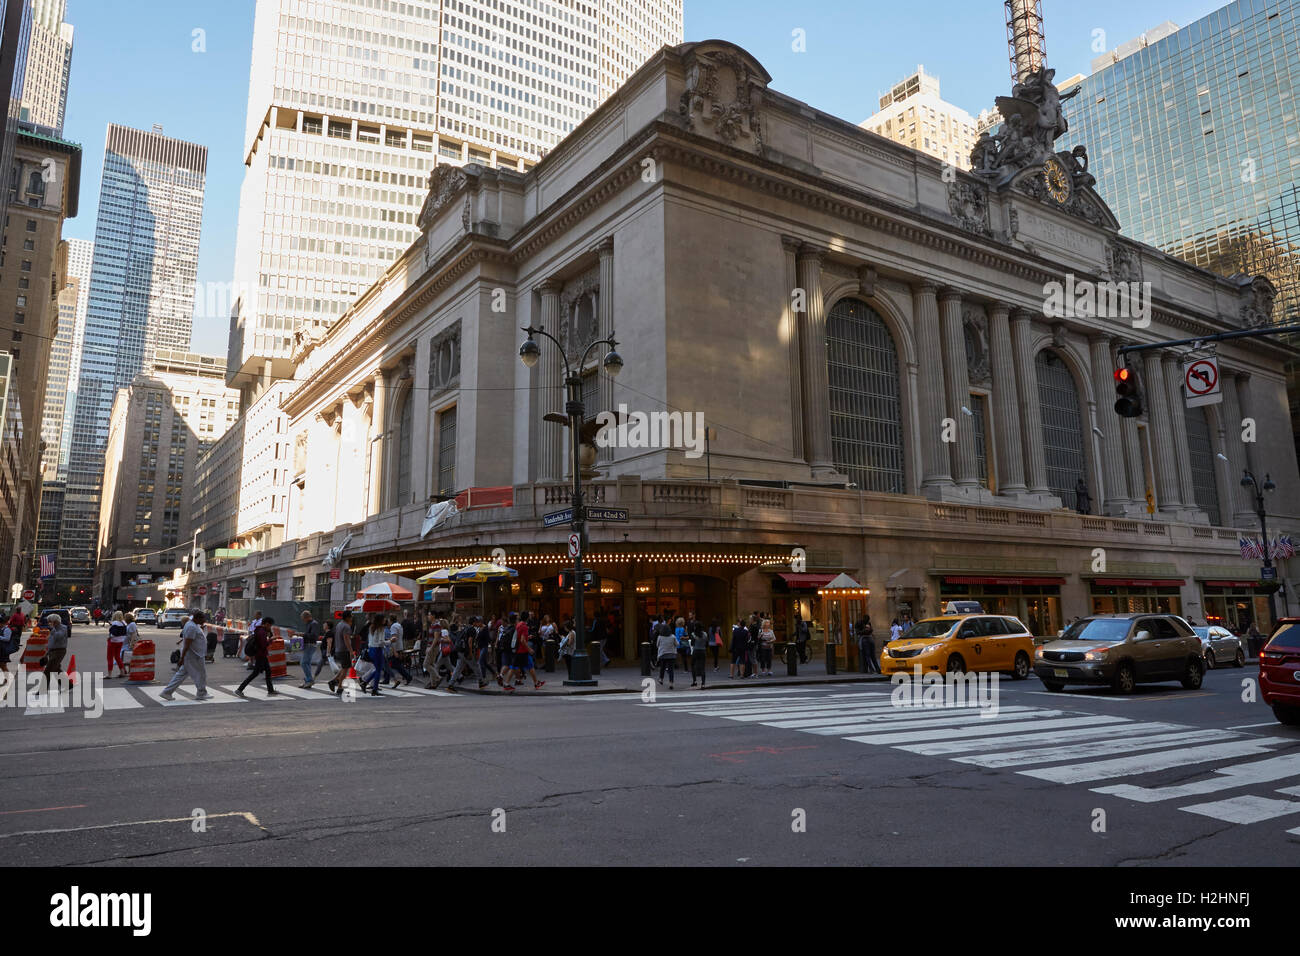 USA: New York, NY, 24 September 2016 East 42nd St, Grand Central Area, Statue des Herme über Grand Central Terminal Eingang ist. Stockfoto